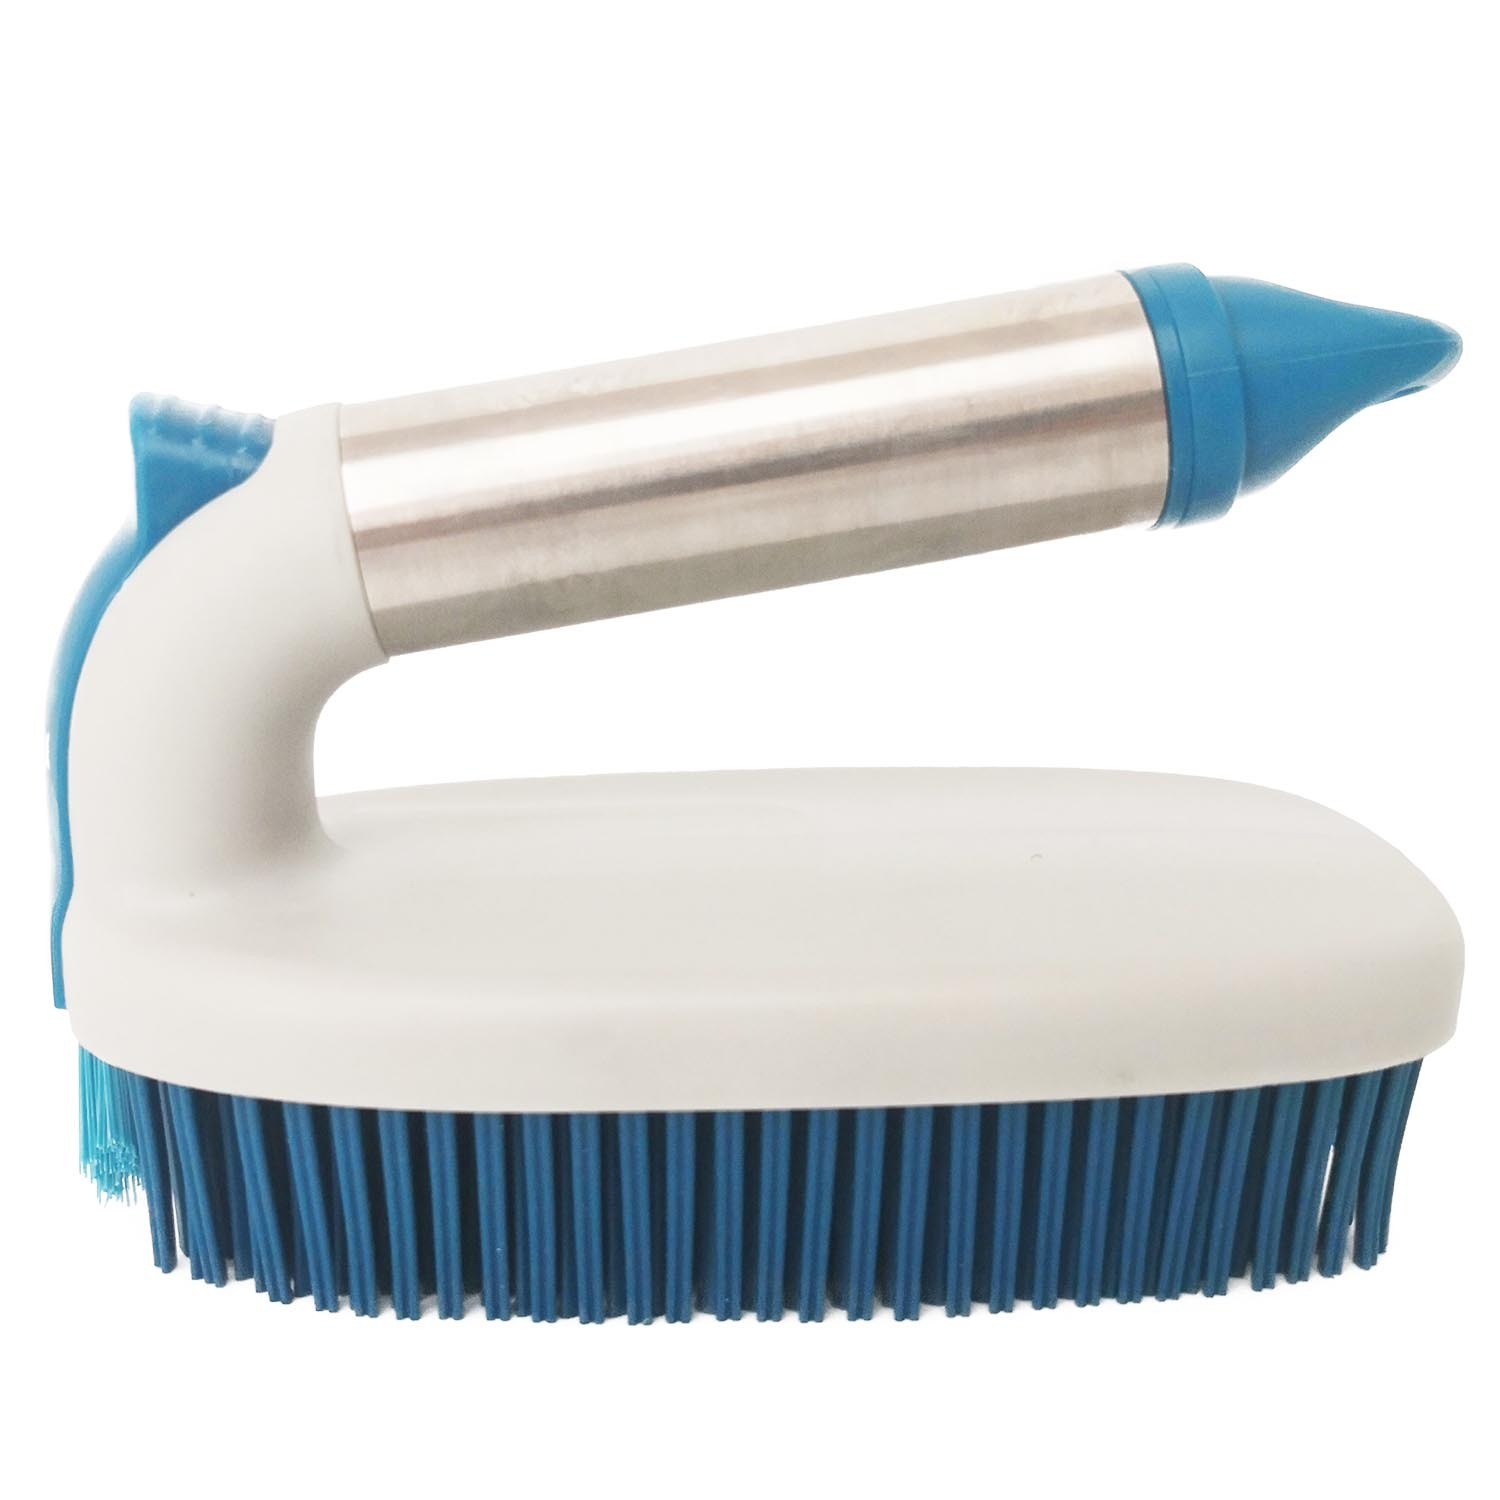 2 in 1 Cleaning Brush Image